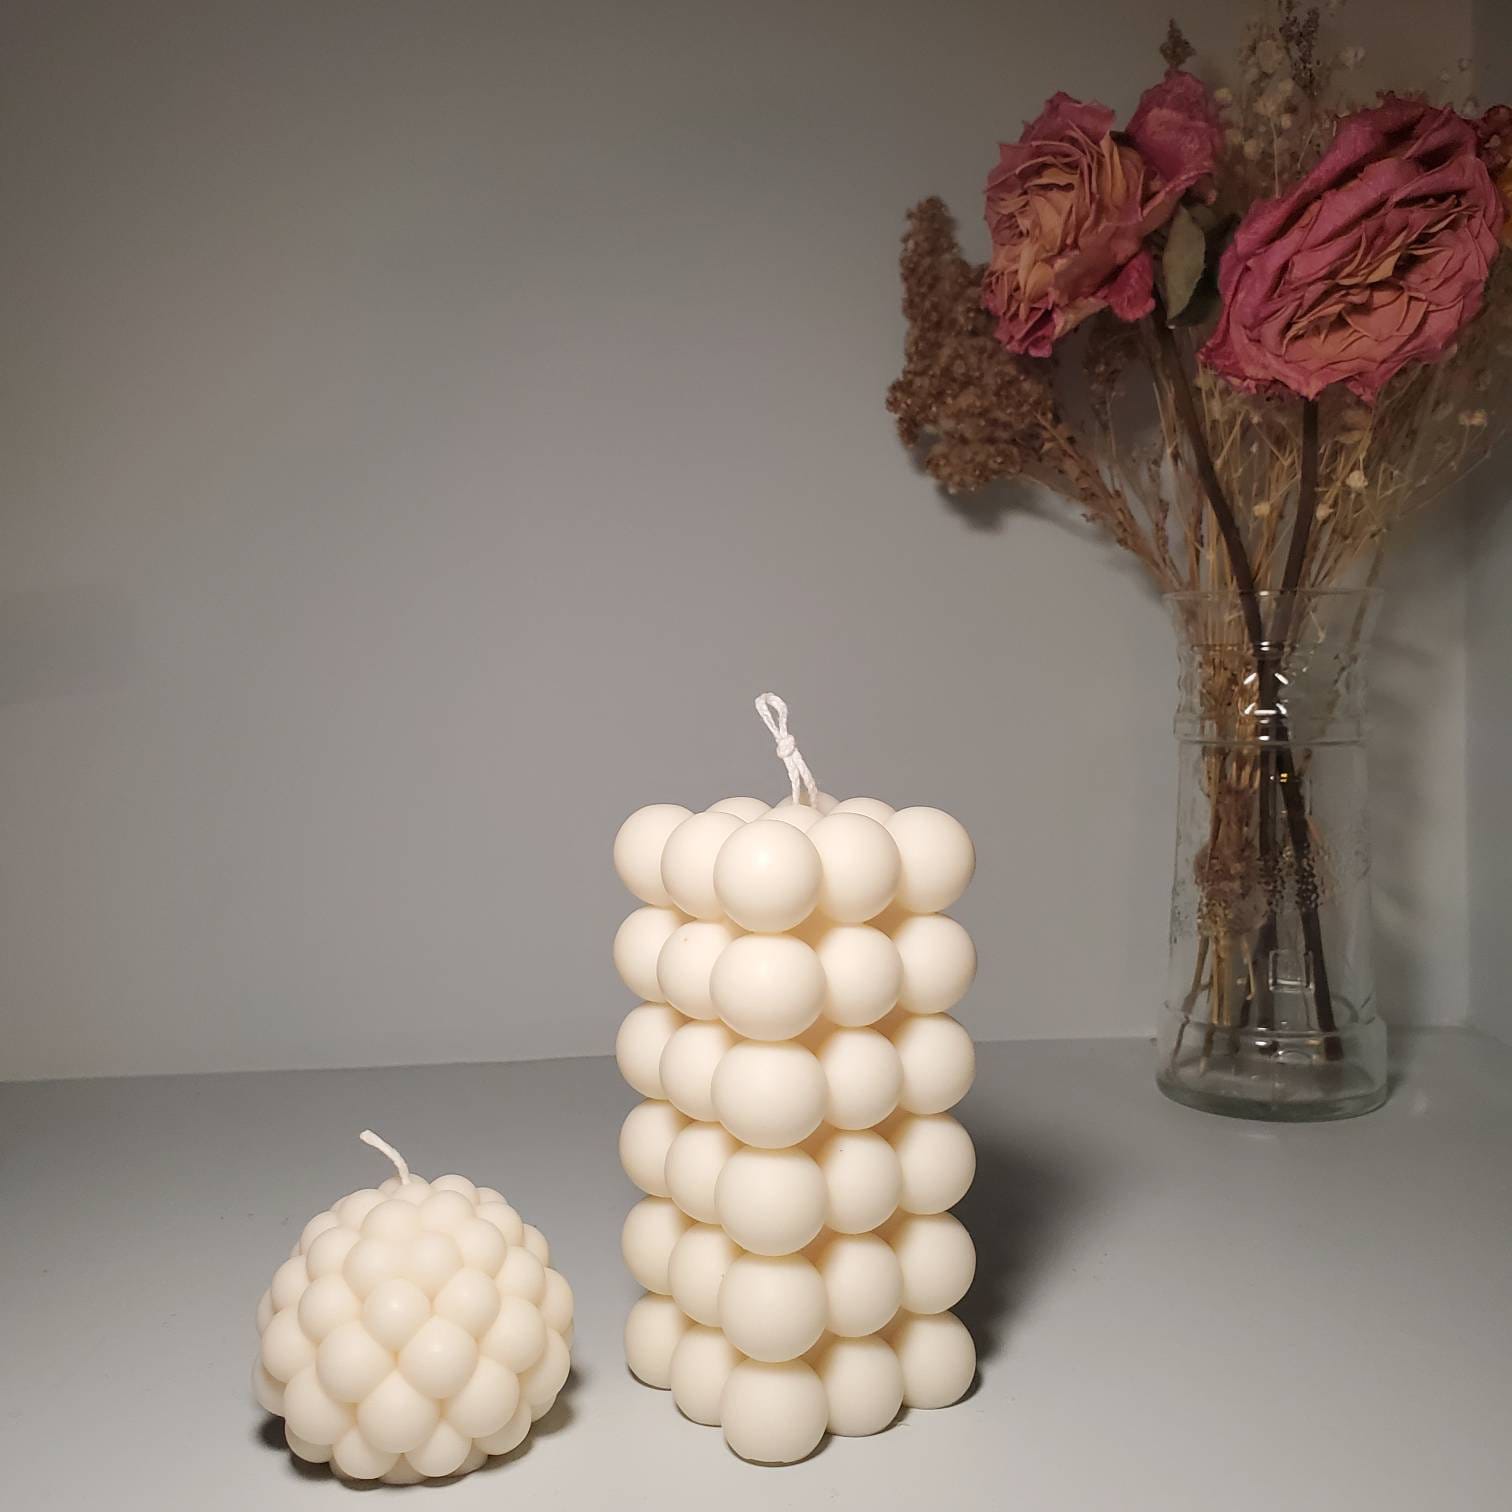 Double Bubble Candle - Tall Square Decorative Candle